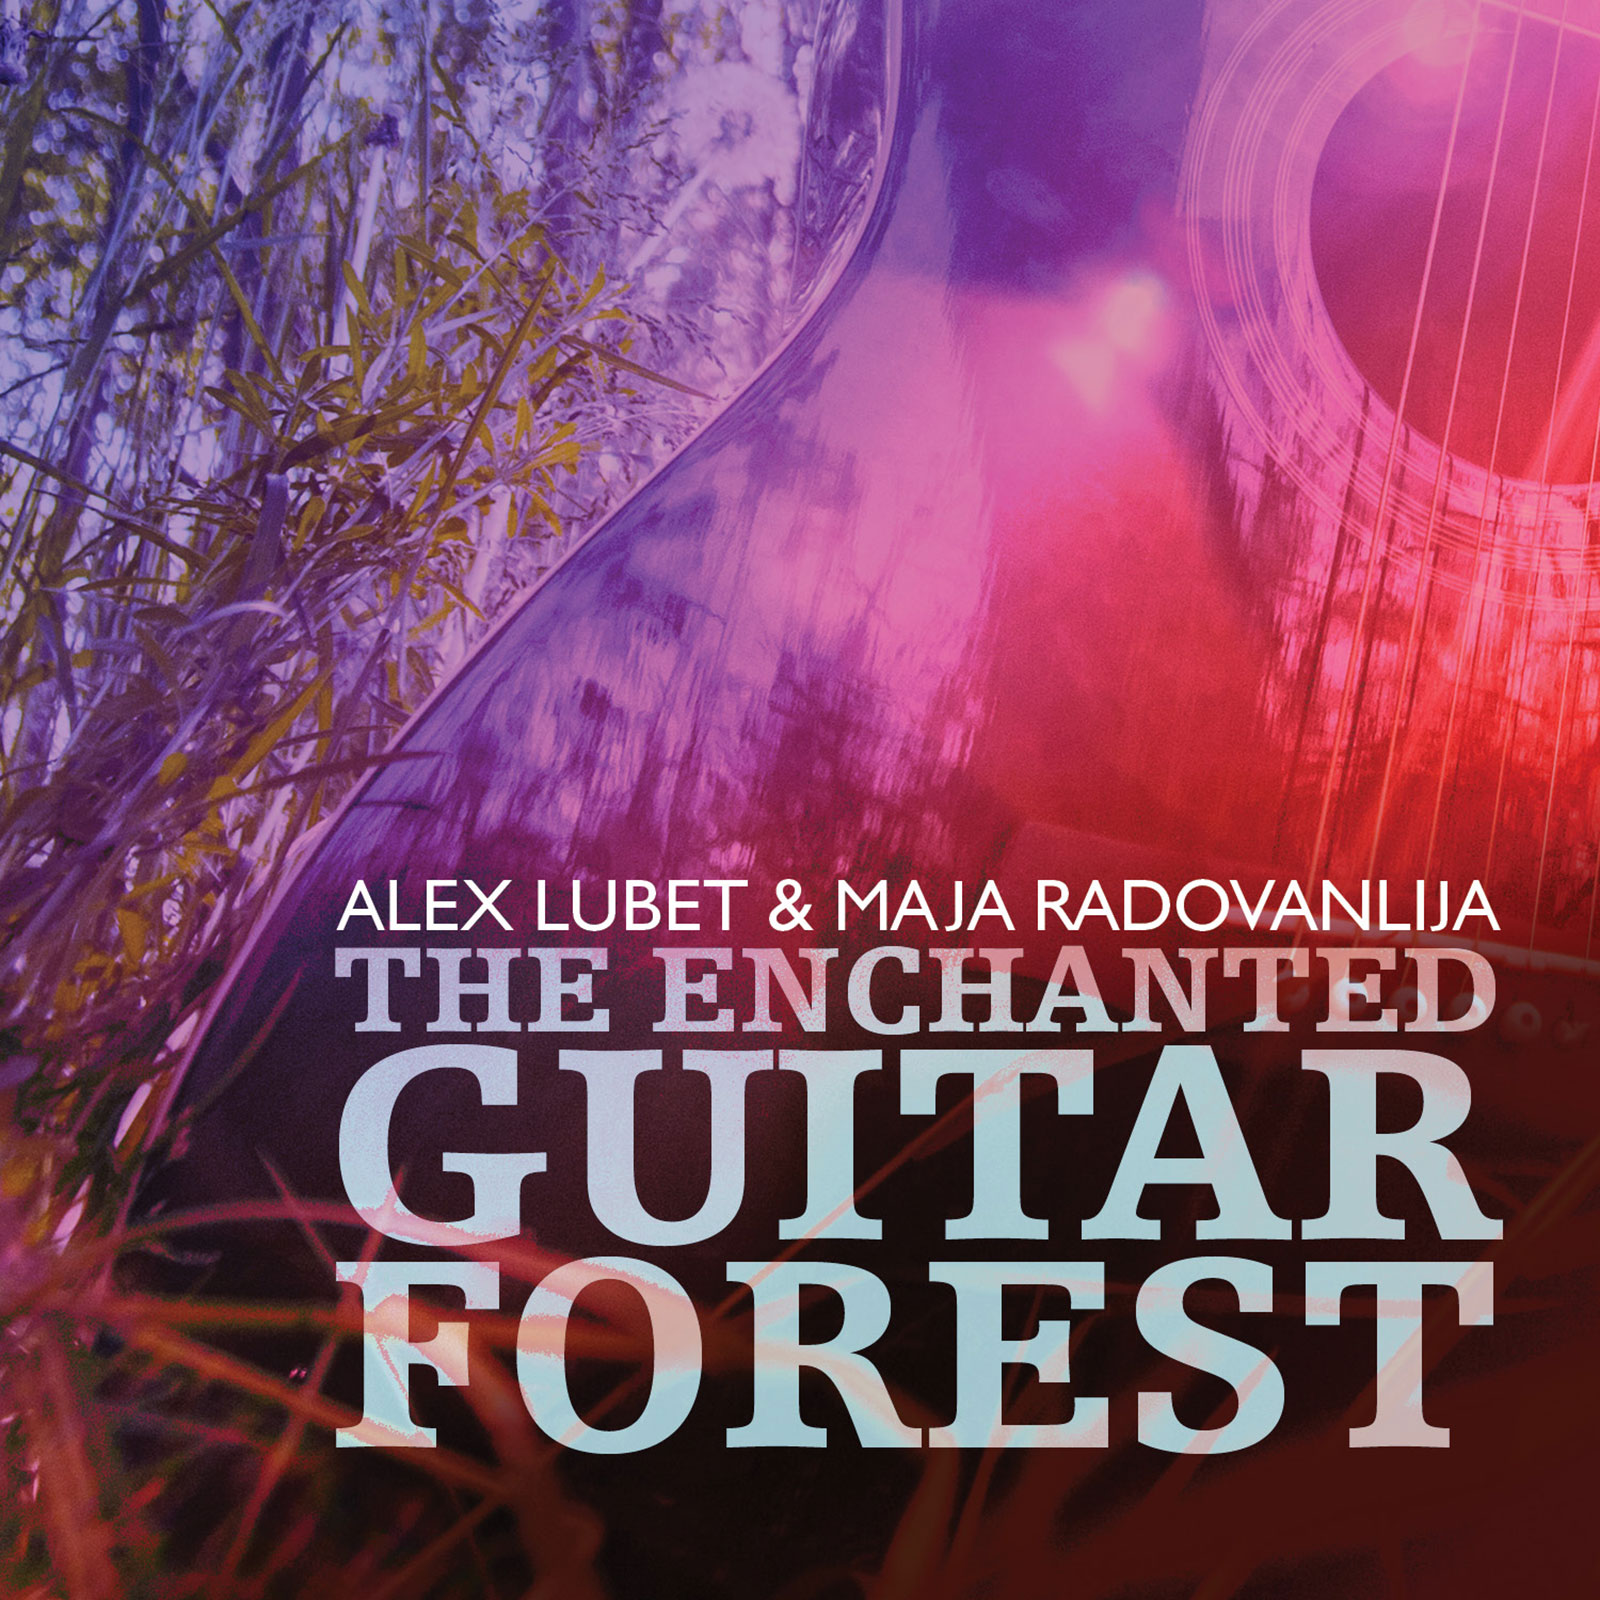 The Enchanted Guitar Forest